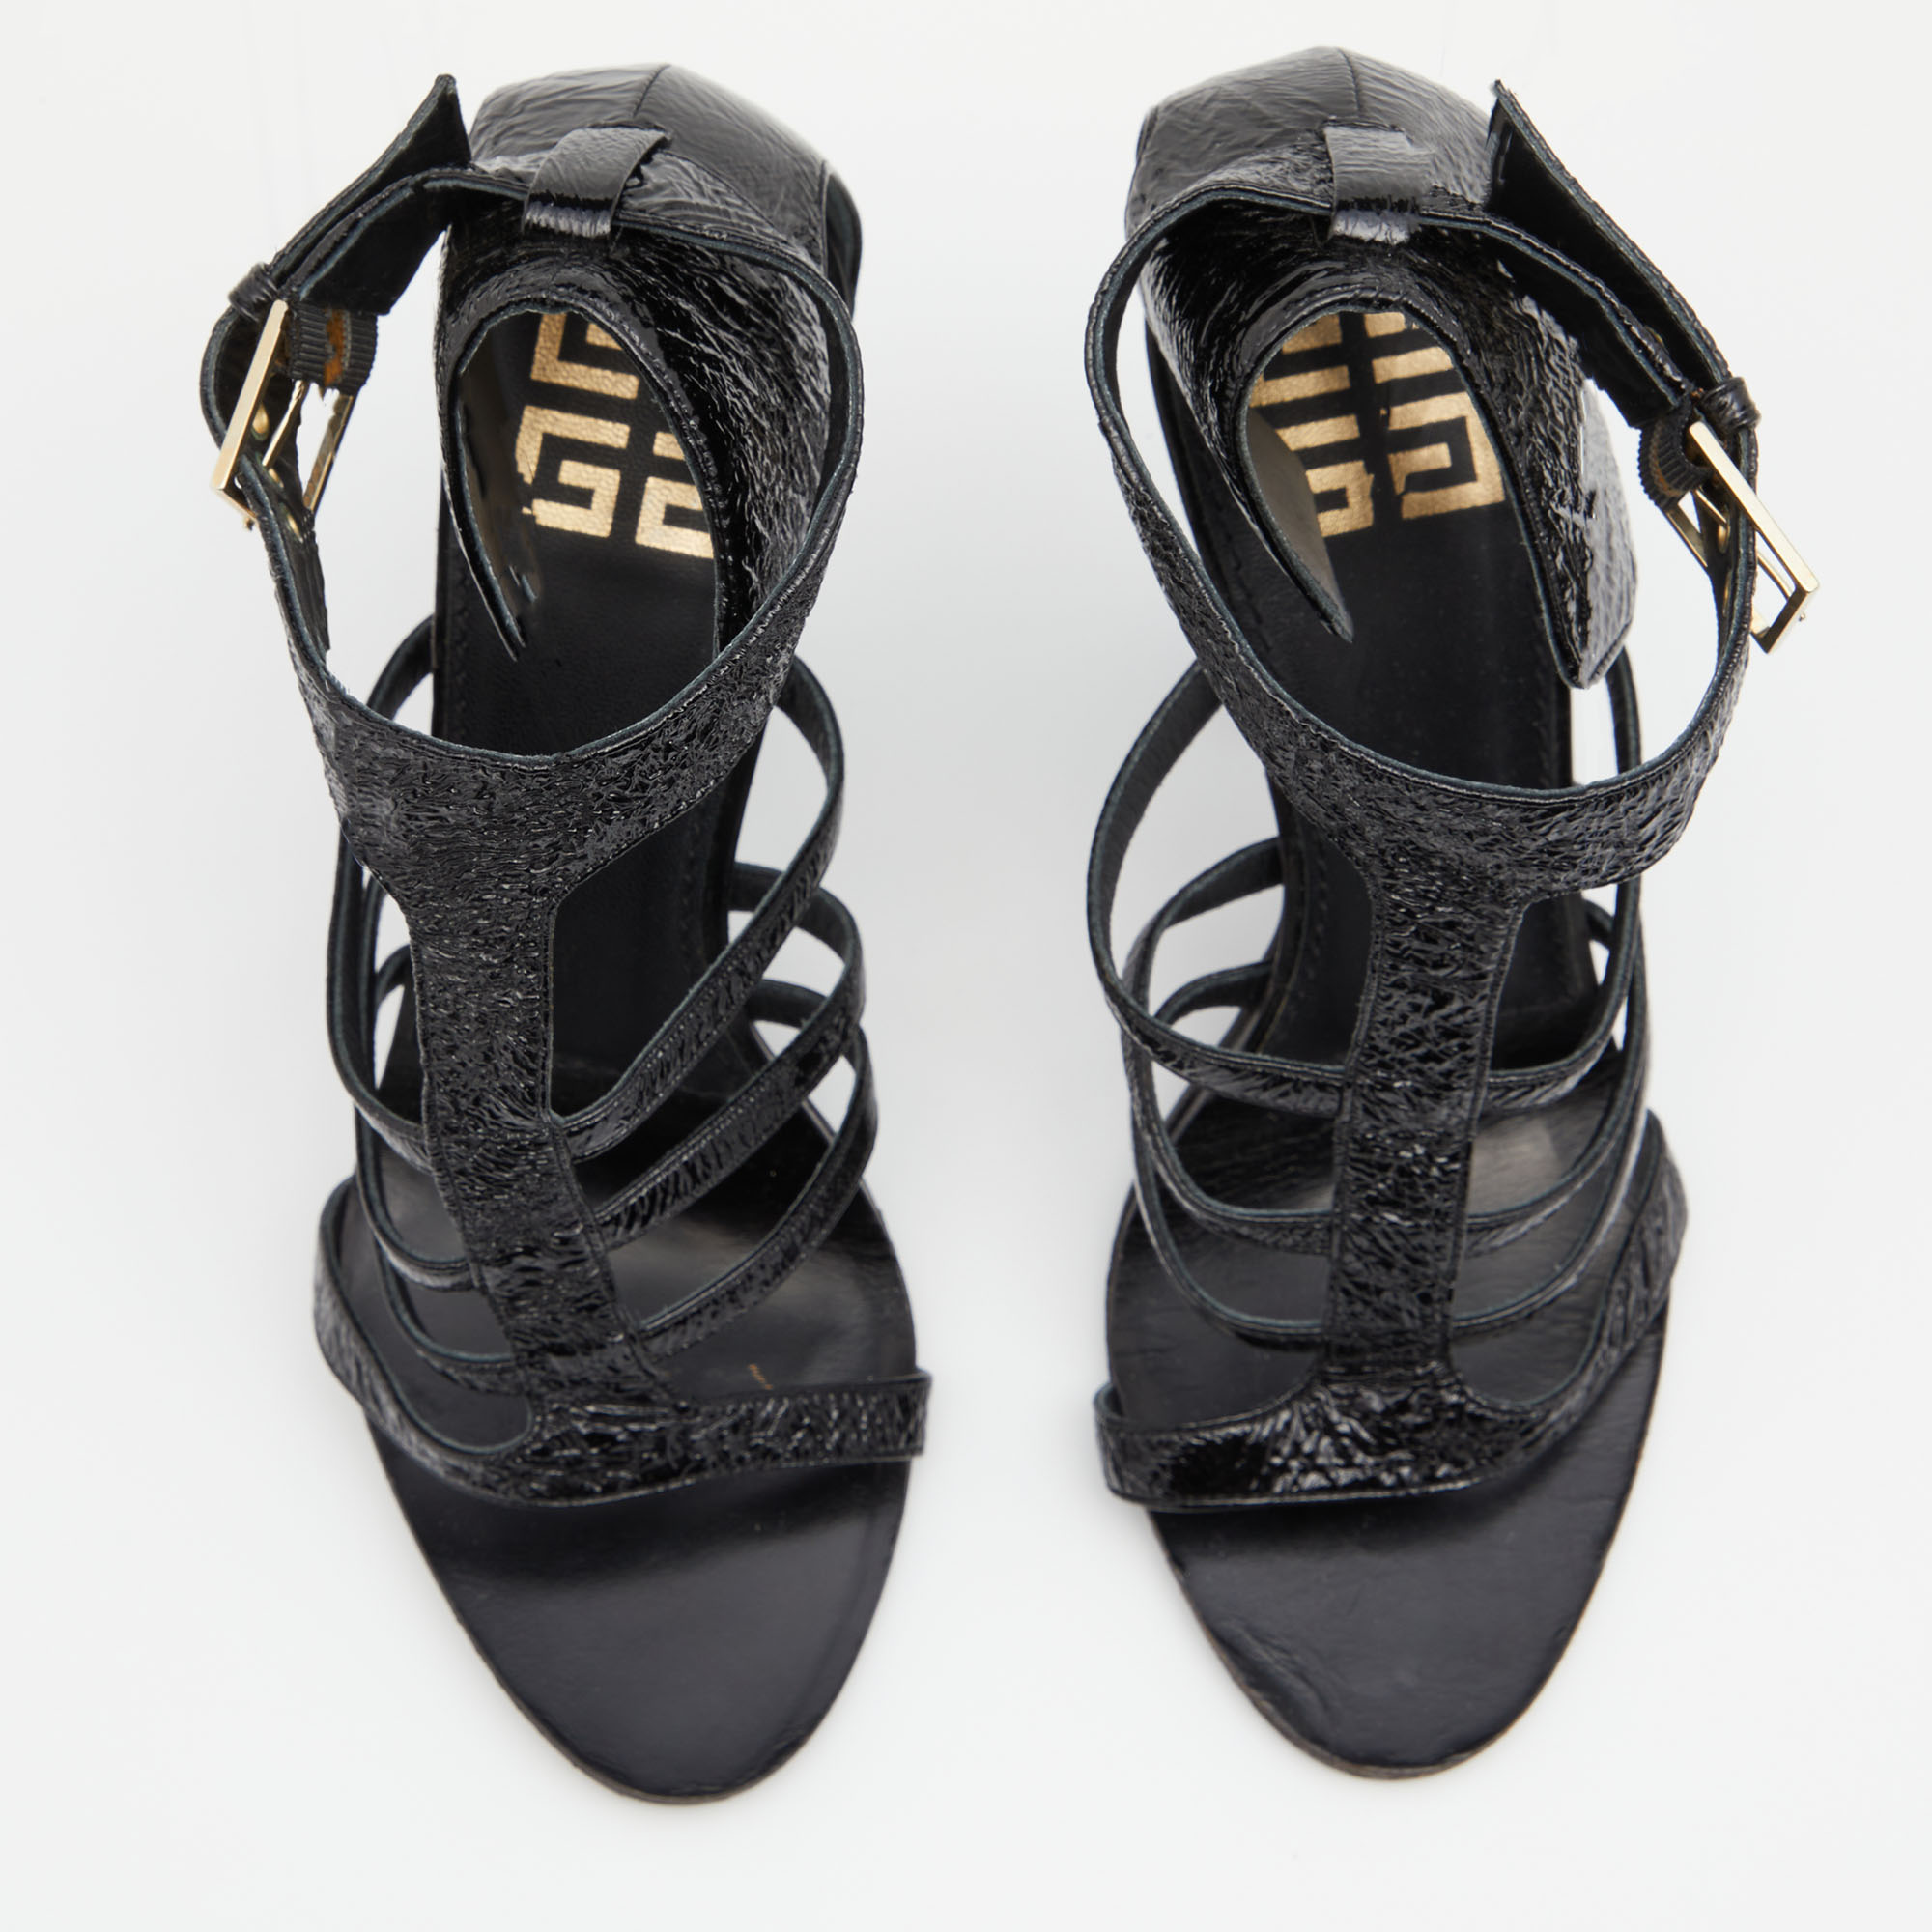 Givenchy Black Patent Leather Caged Open Toe Sandals Size 36.5